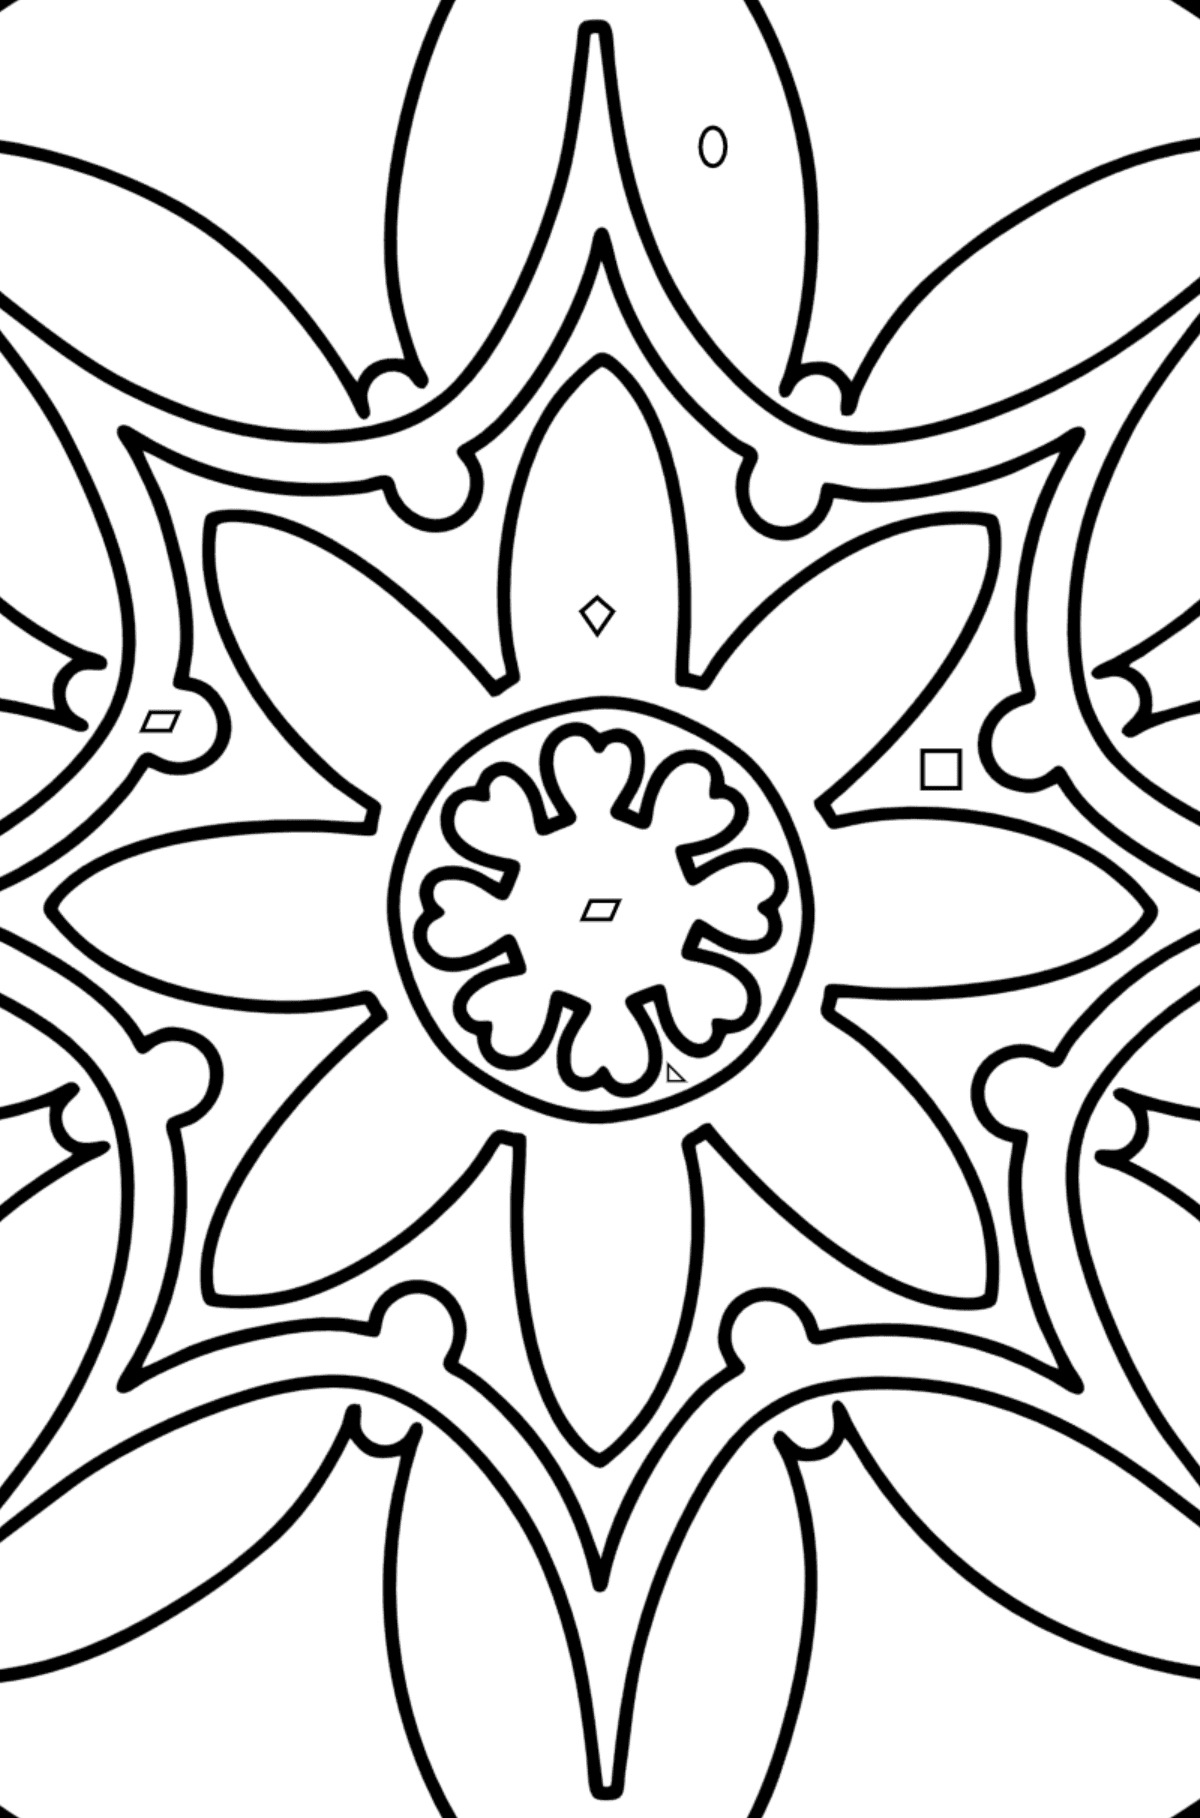 Mandala coloring page - 7 elements - Coloring by Geometric Shapes for Kids